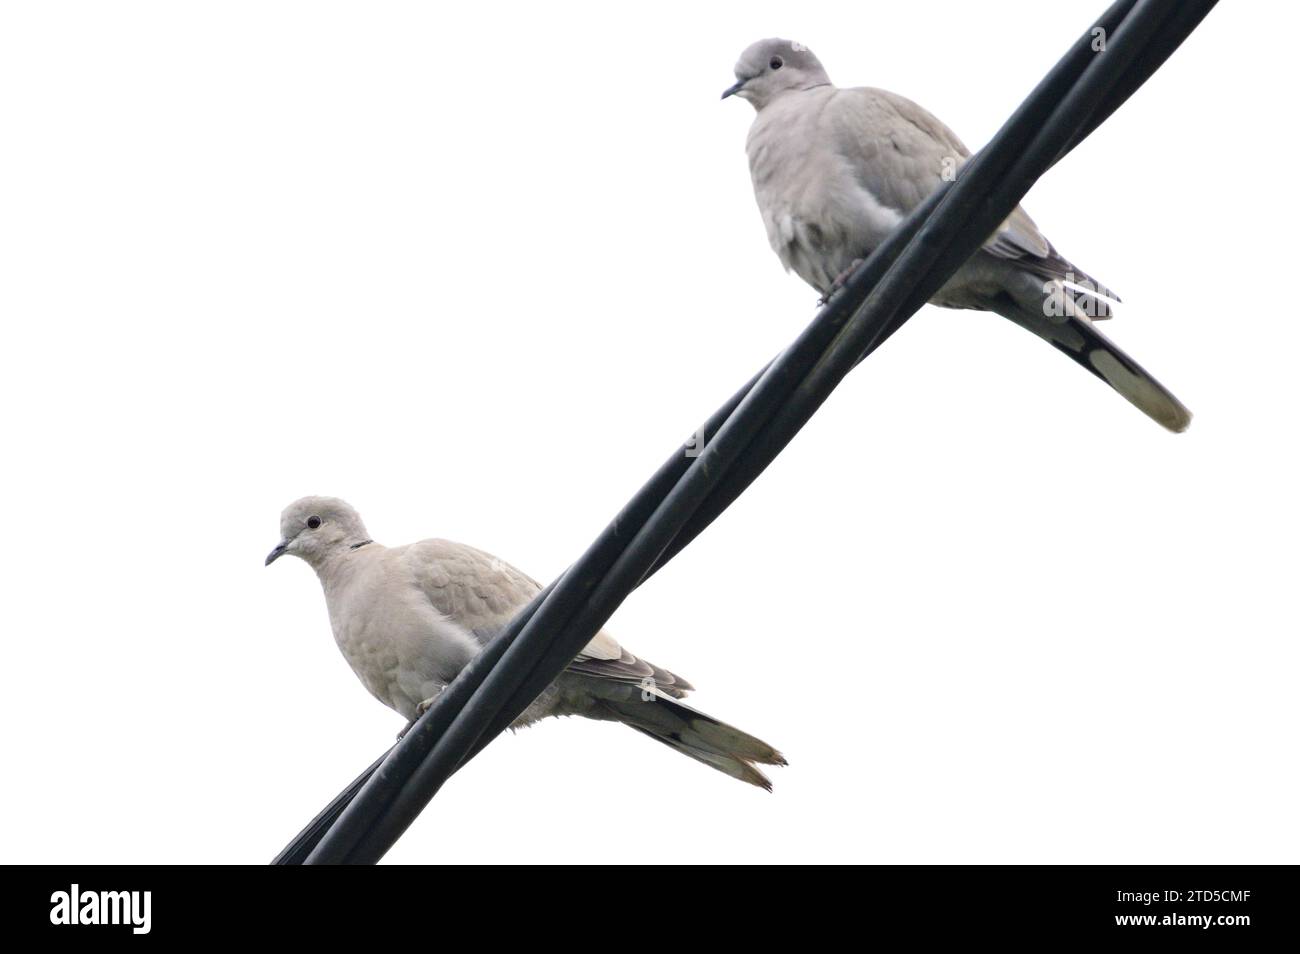 Bird Streptopelia decaocto aka Eurasian collared dove is sitting on electric wire in residential area. Czech republic nature. Stock Photo